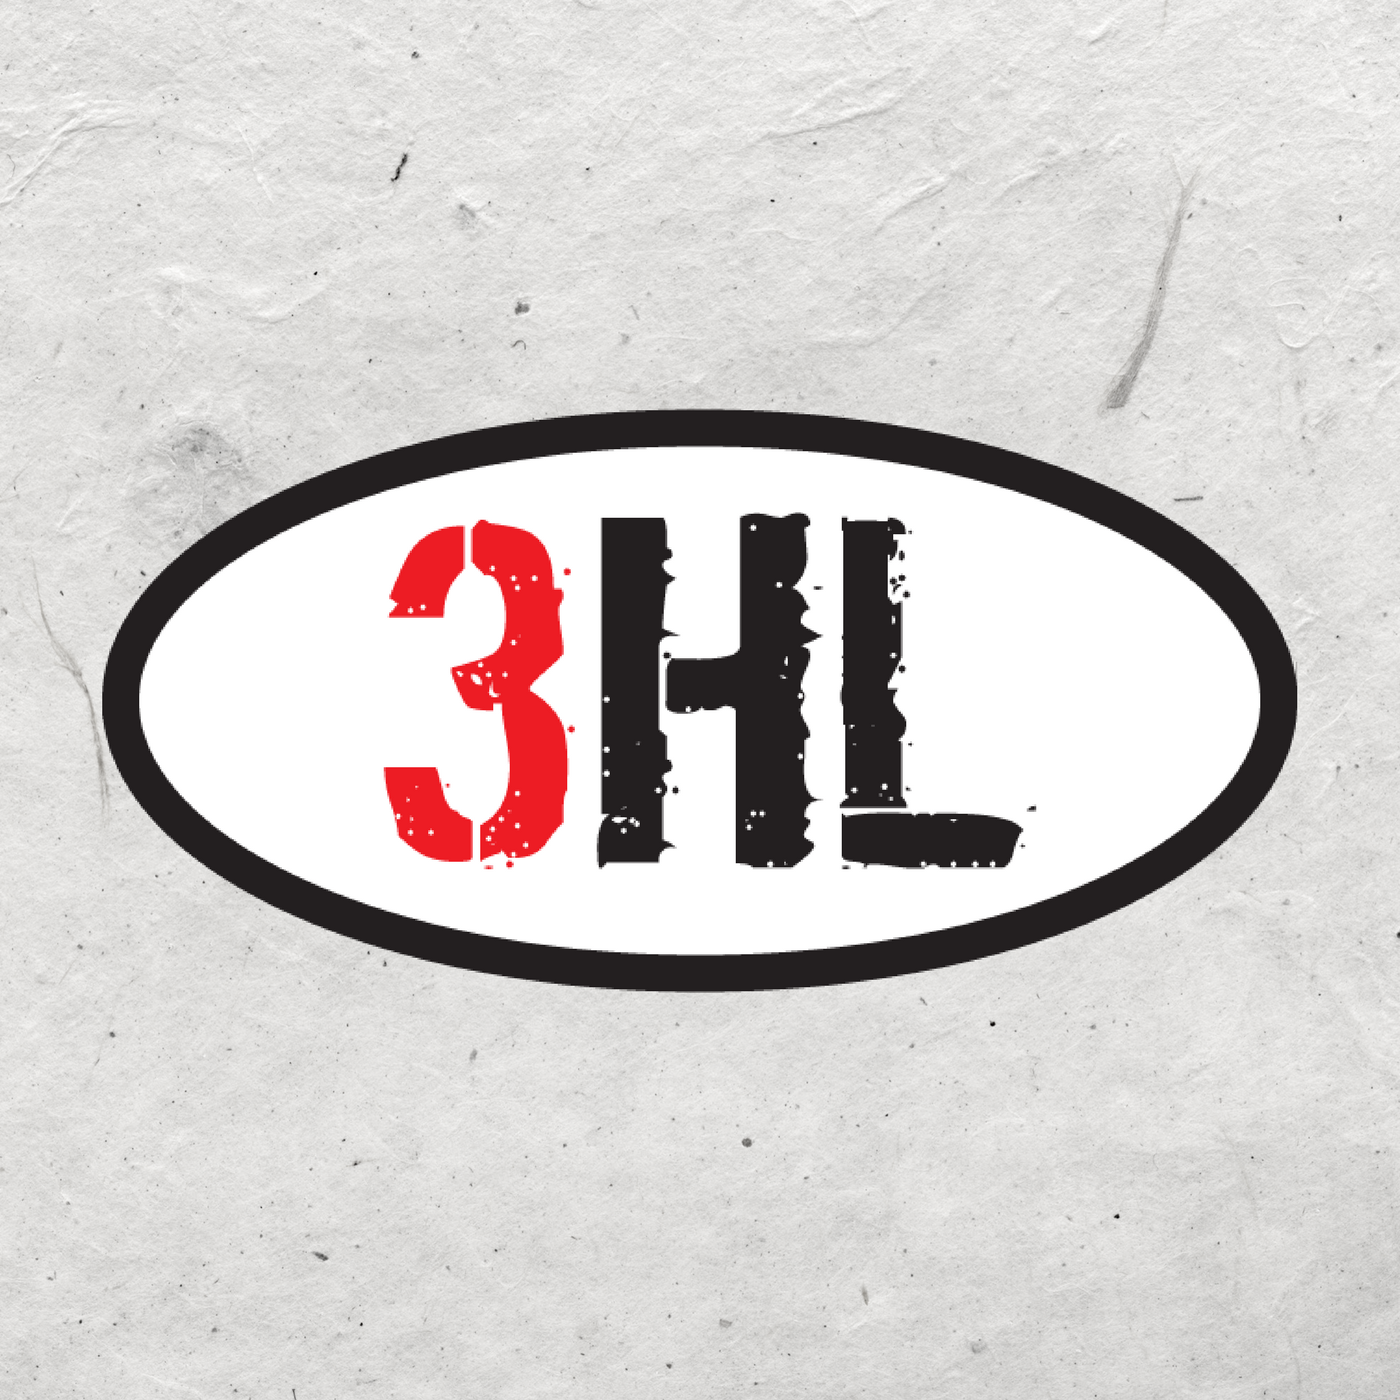 3HL - Hour 3 - The Battle for Father's Month Begins